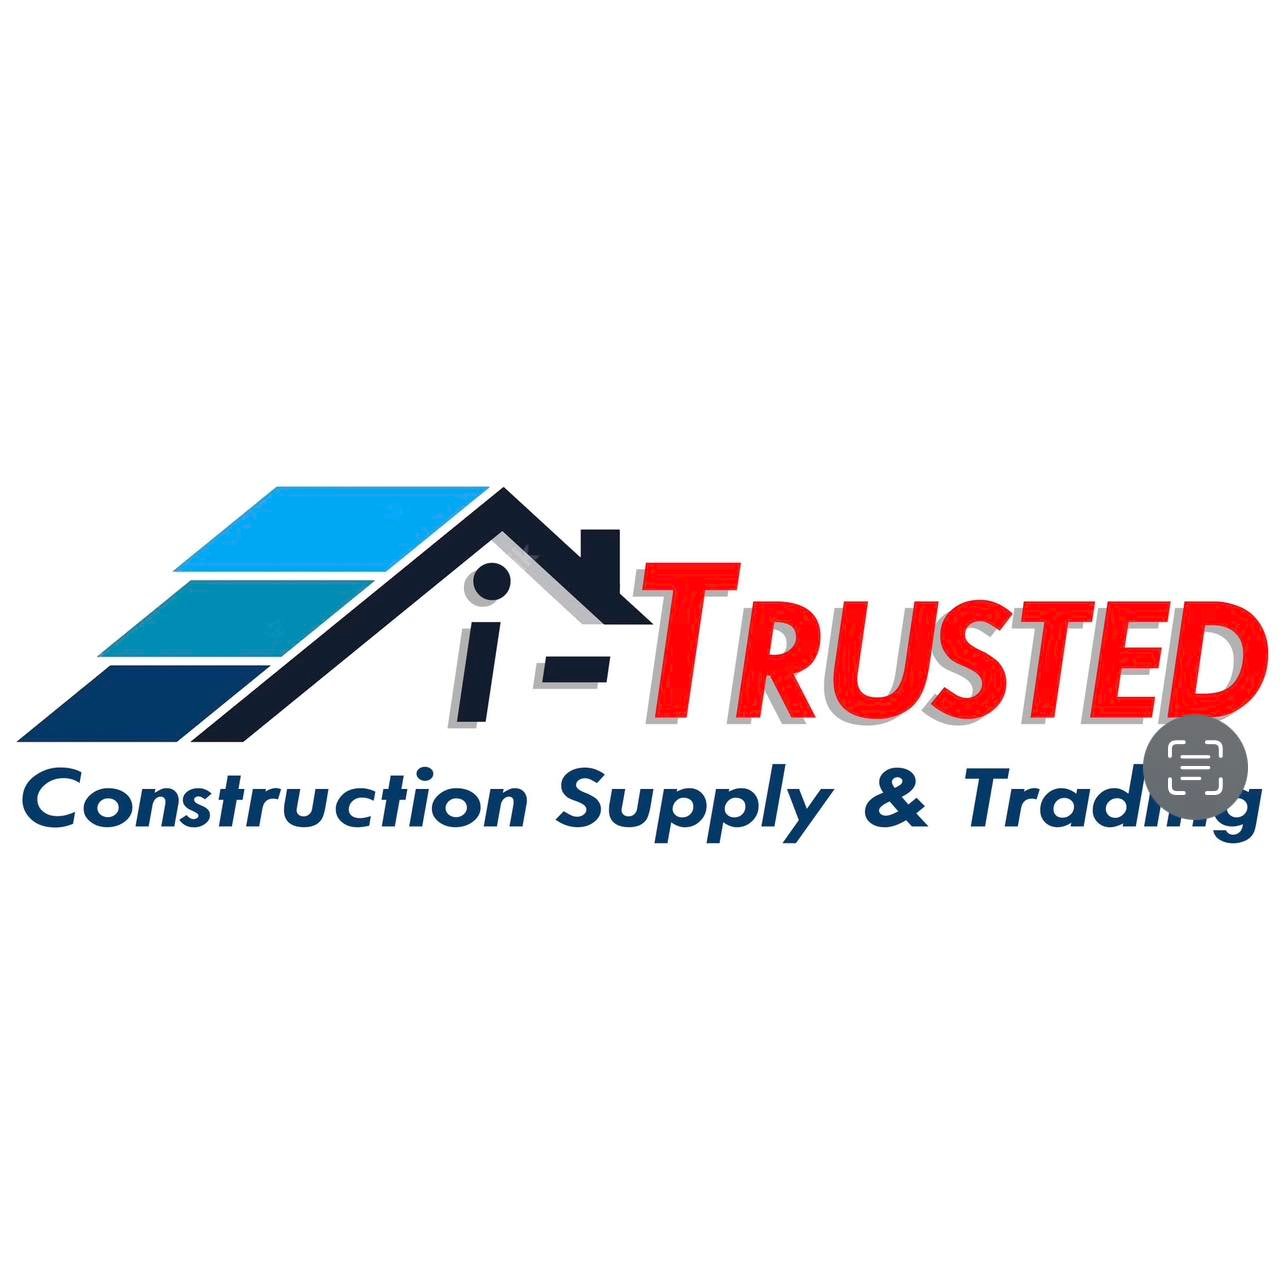 iTrusted Construction Supplies Trading: Your Trusted Partner for Quality Roofing and Construction Materials in Iligan City